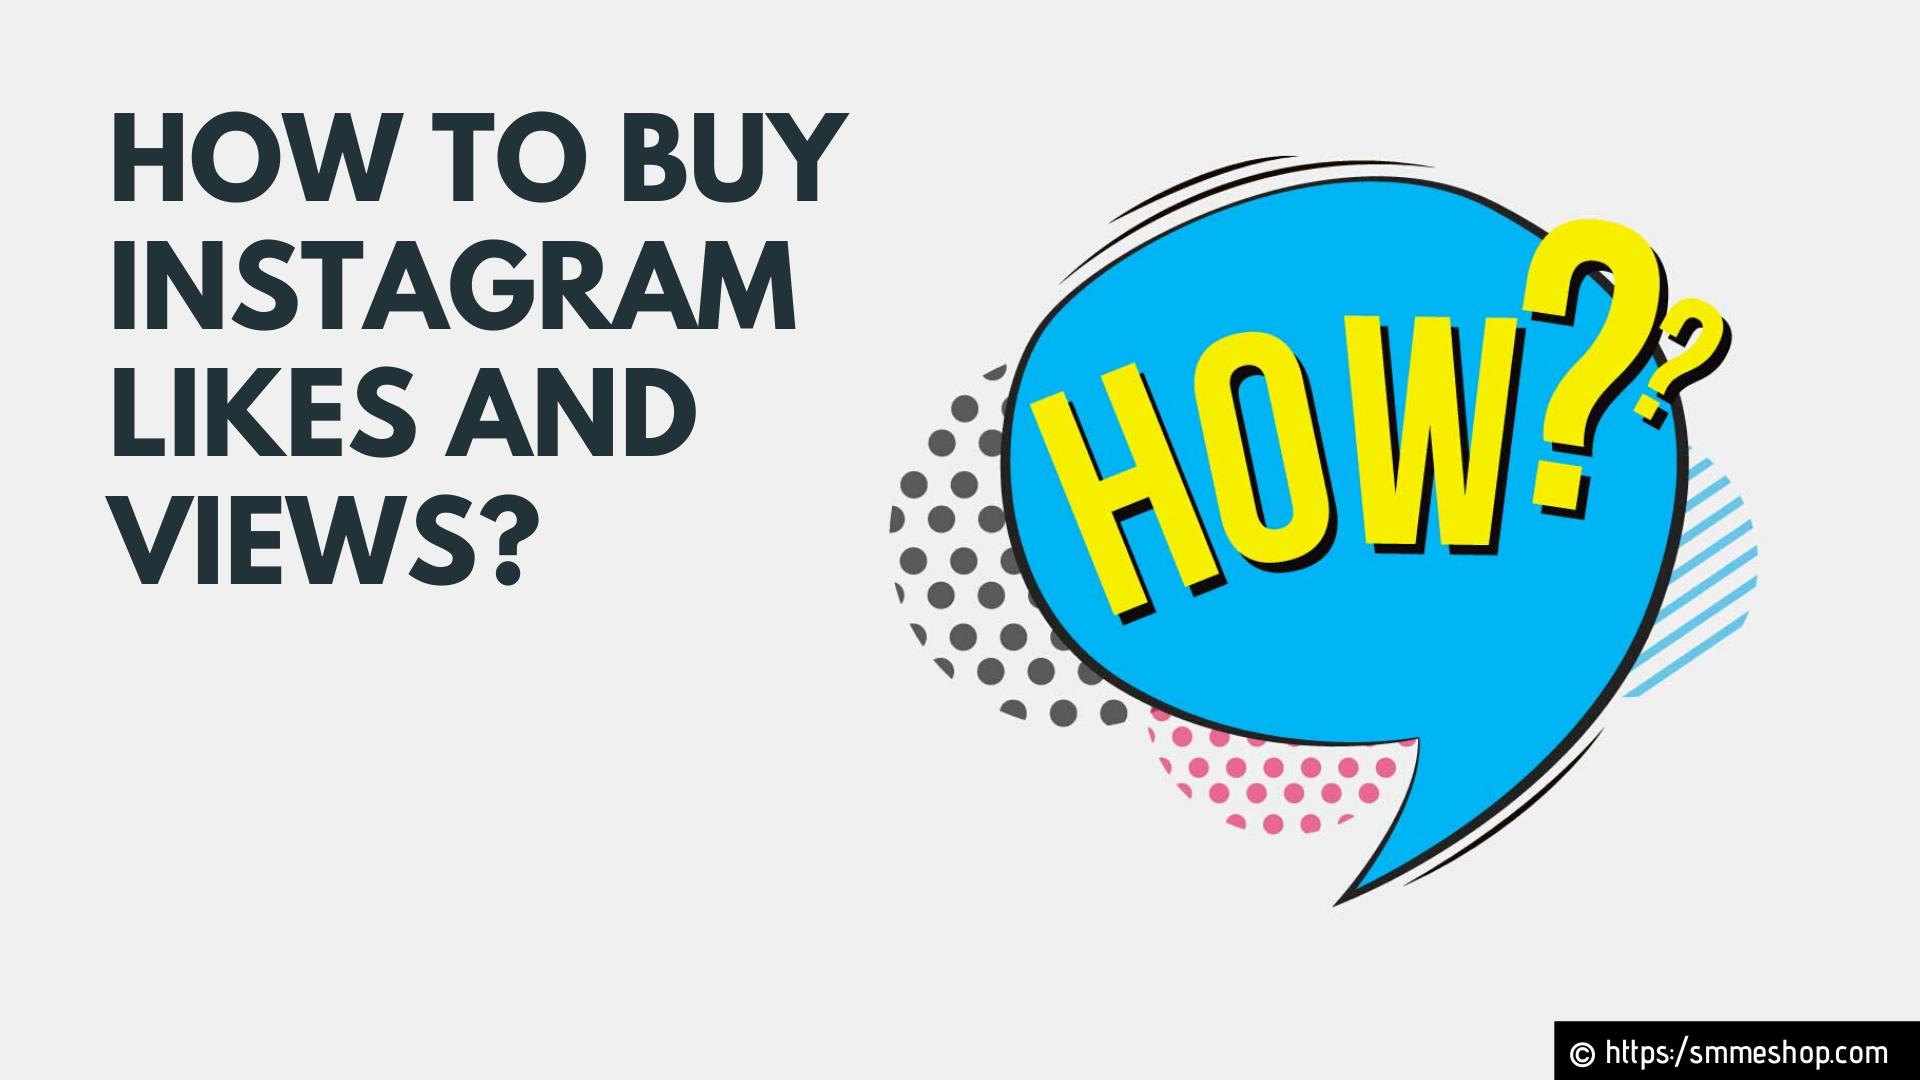 How to Buy Instagram Likes and Views?